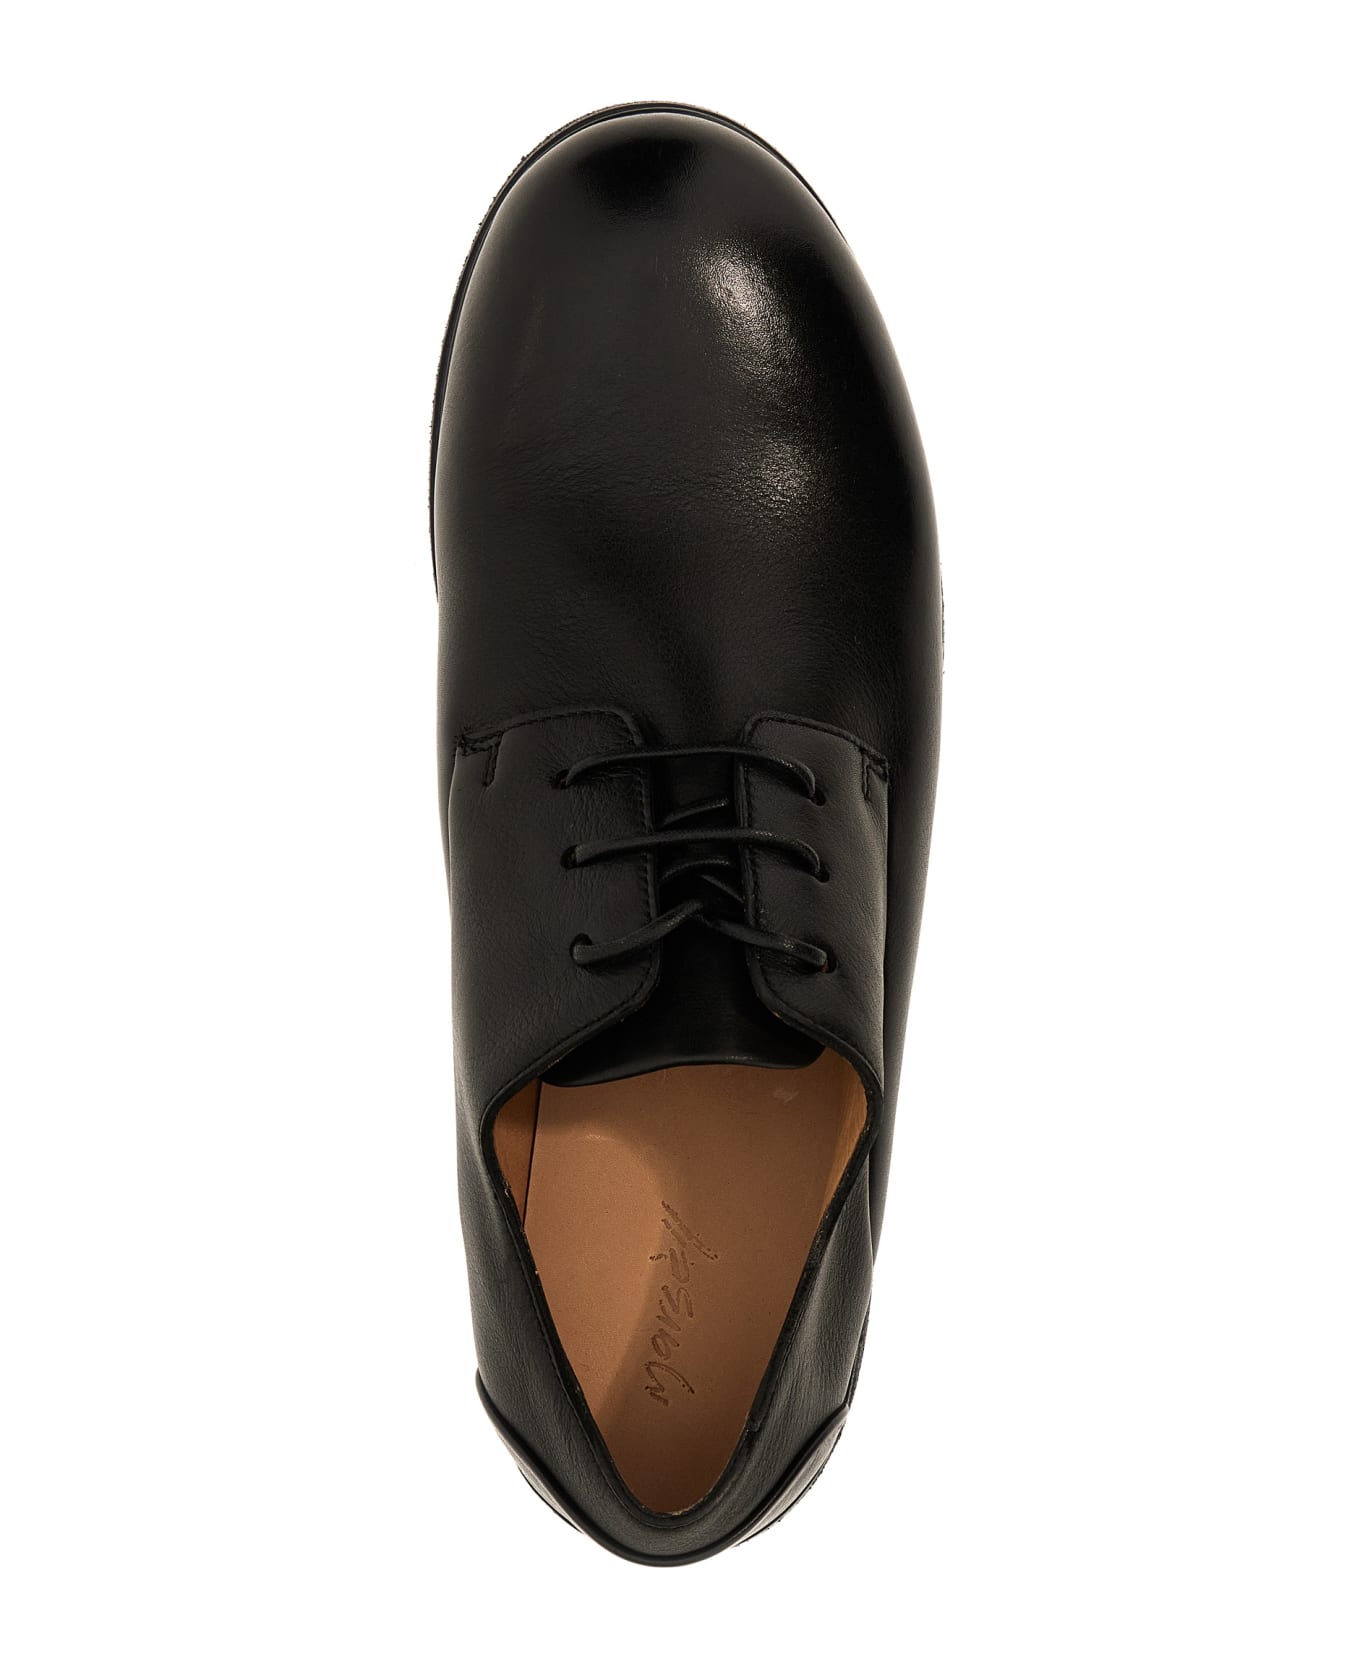 Marsell 'zucca Media' Derby Shoes - Black  